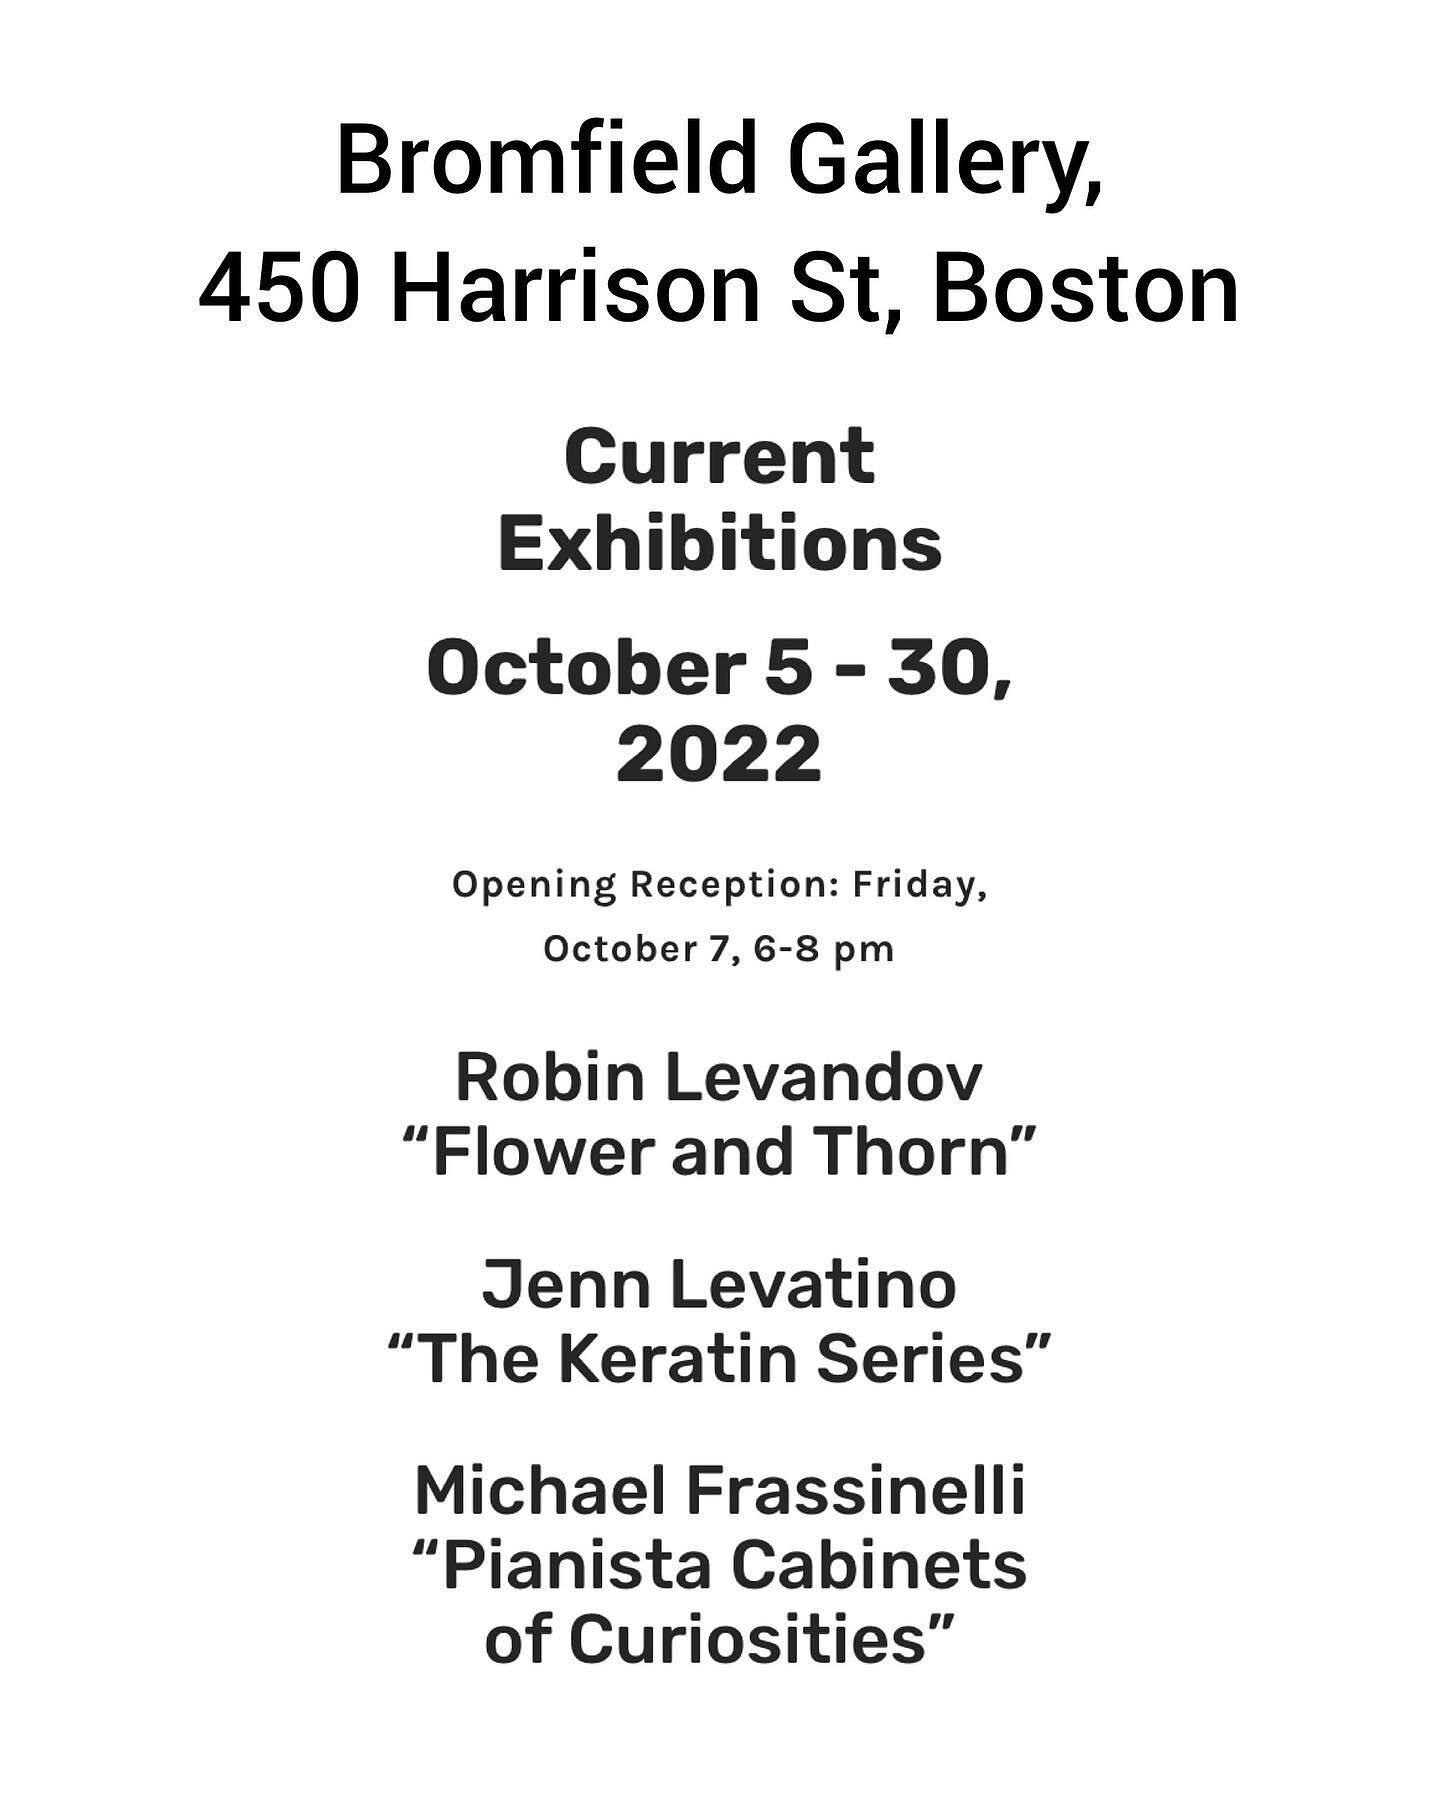 After hundreds of hours, it is finally (almost) here: Cabinet of Curiosities @bromfieldgallery Friday, Oct 7,2022, 6-8, 450 Harrison Street. See you there!